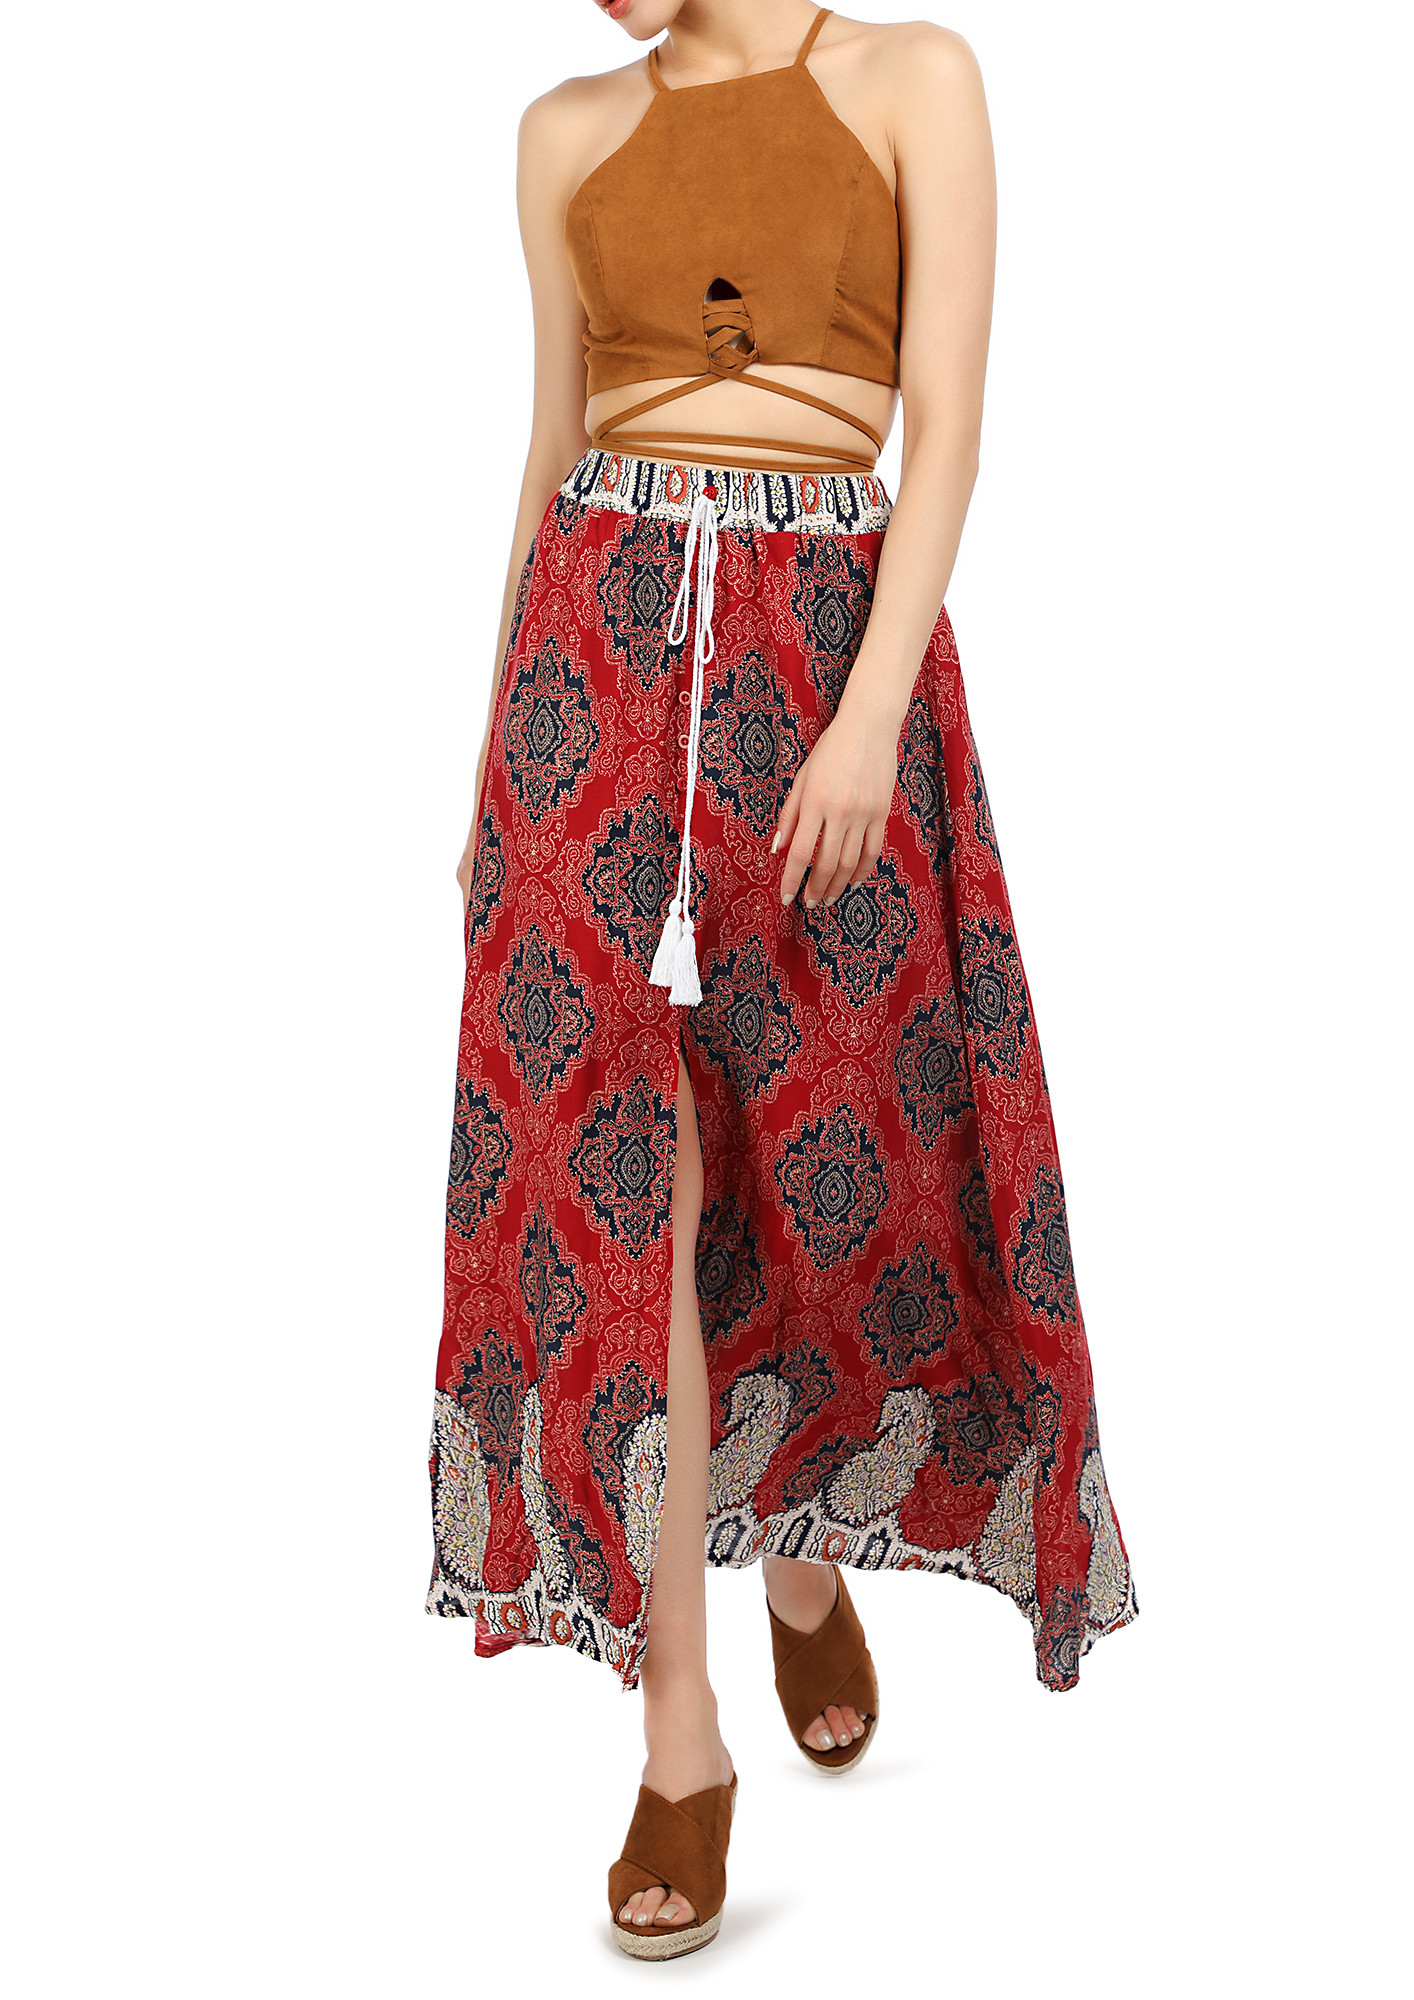 CATCH THE COOL BREEZE RED MAXI SKIRT